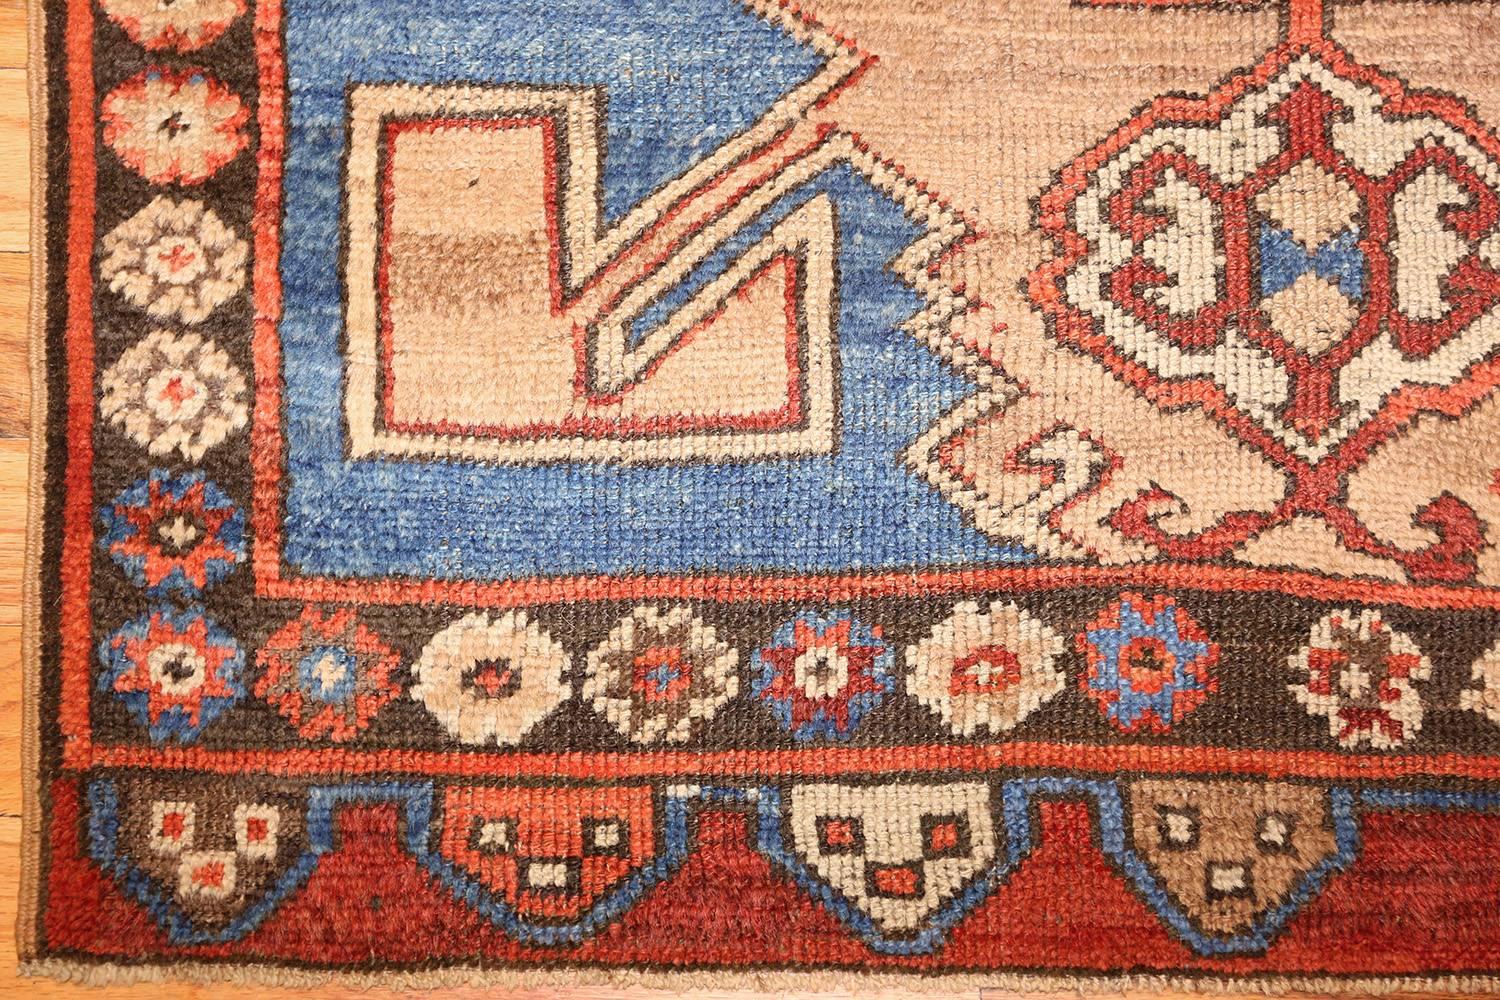 19th Century Small Scatter Size Tribal Antique Turkish Karapinar Rug